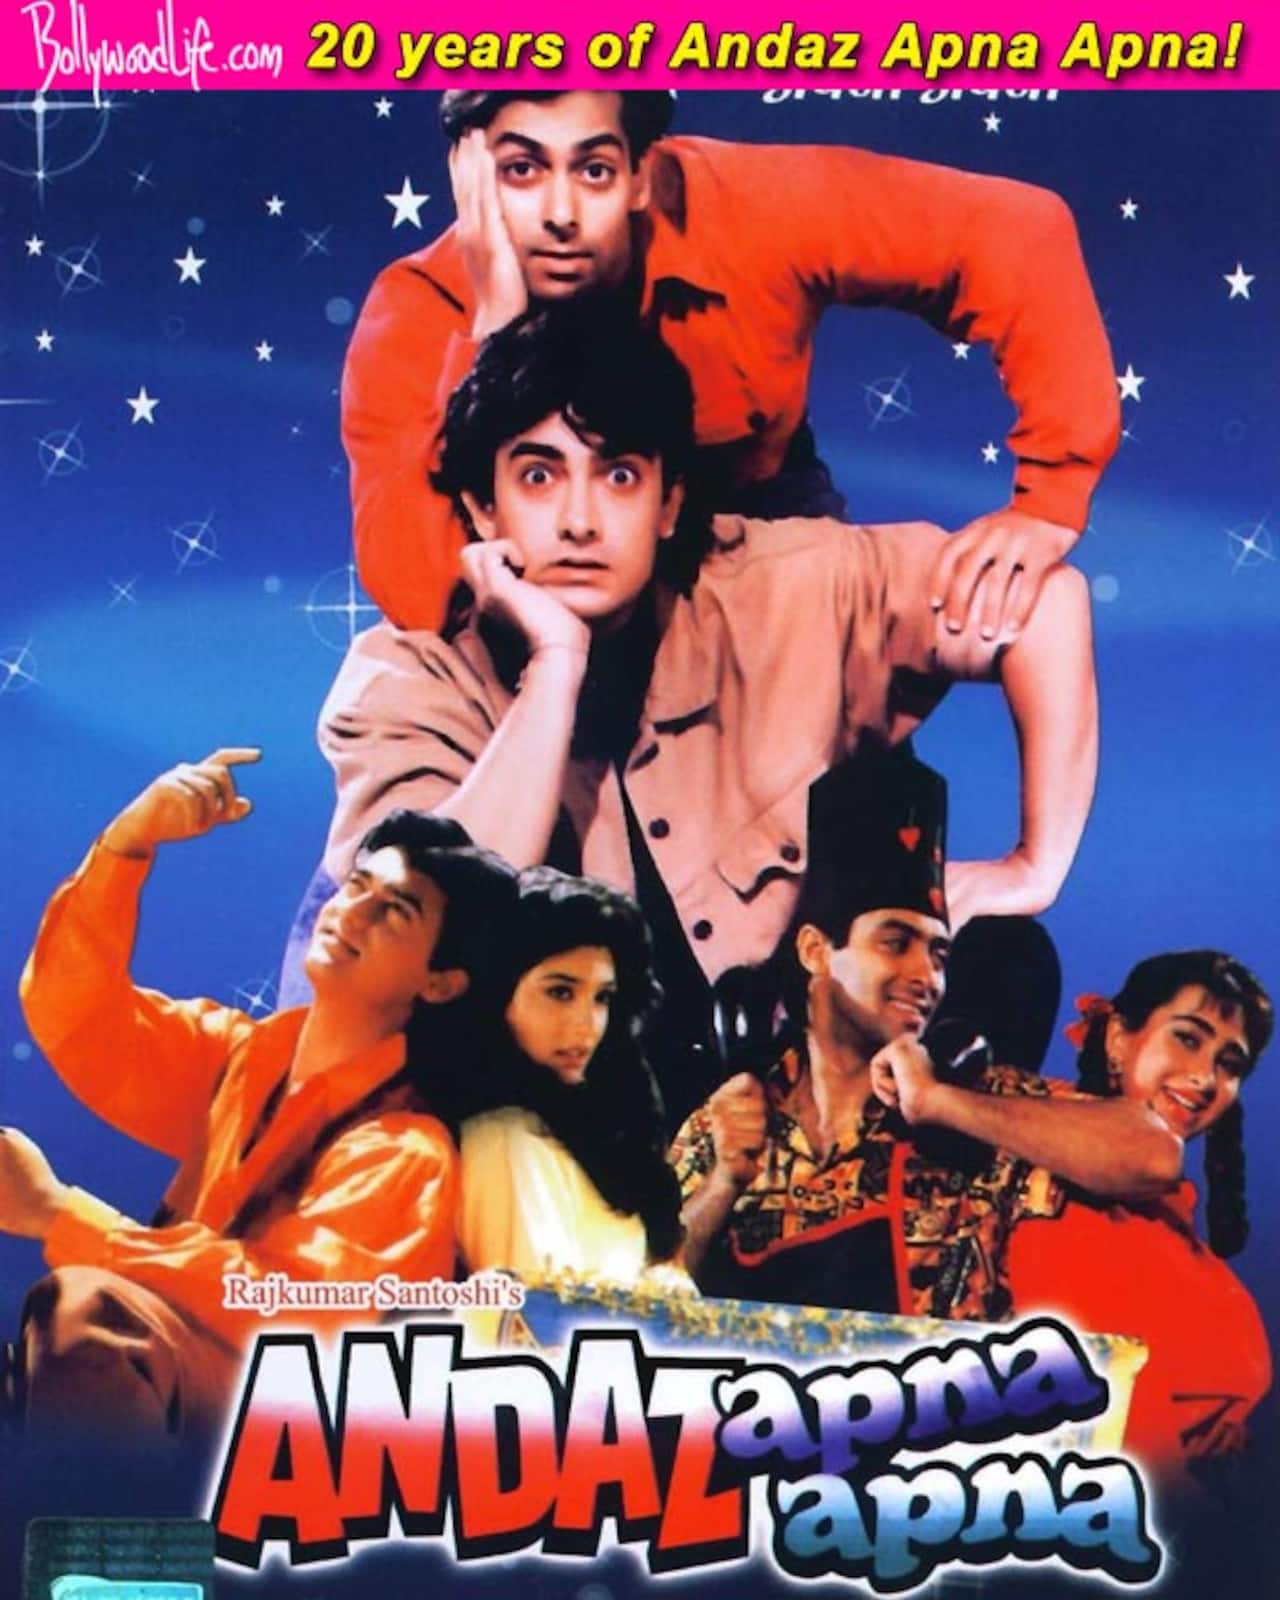 7 iconic dialogues from Aamir Khan and Salman Khan's Andaz Apna Apna -  watch videos! - Bollywood News & Gossip, Movie Reviews, Trailers & Videos  at 